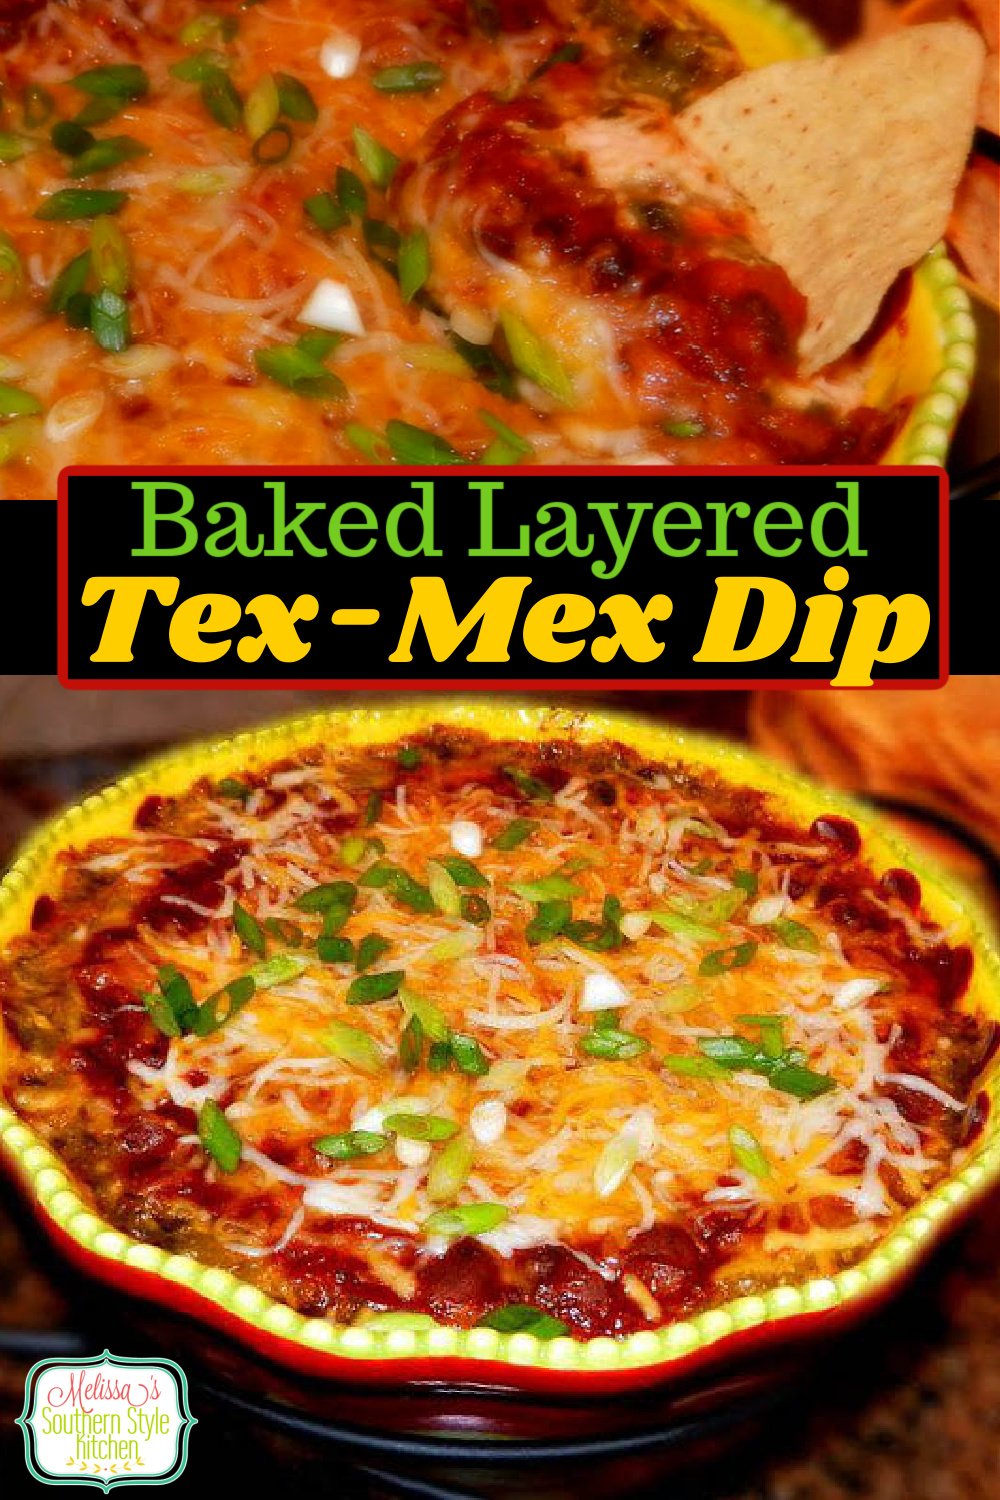 Grab some tortilla chips and start dipping this delicious warm and gooey Baked Layered Tex Mex Dip #bakedtexmexdip #mexicandip #layeredmexicandip #texmex #chili #diprecipes #appetizers #mexicanfood #football #gamedayrecipes #southernfood #southernrecipes via @melissasssk